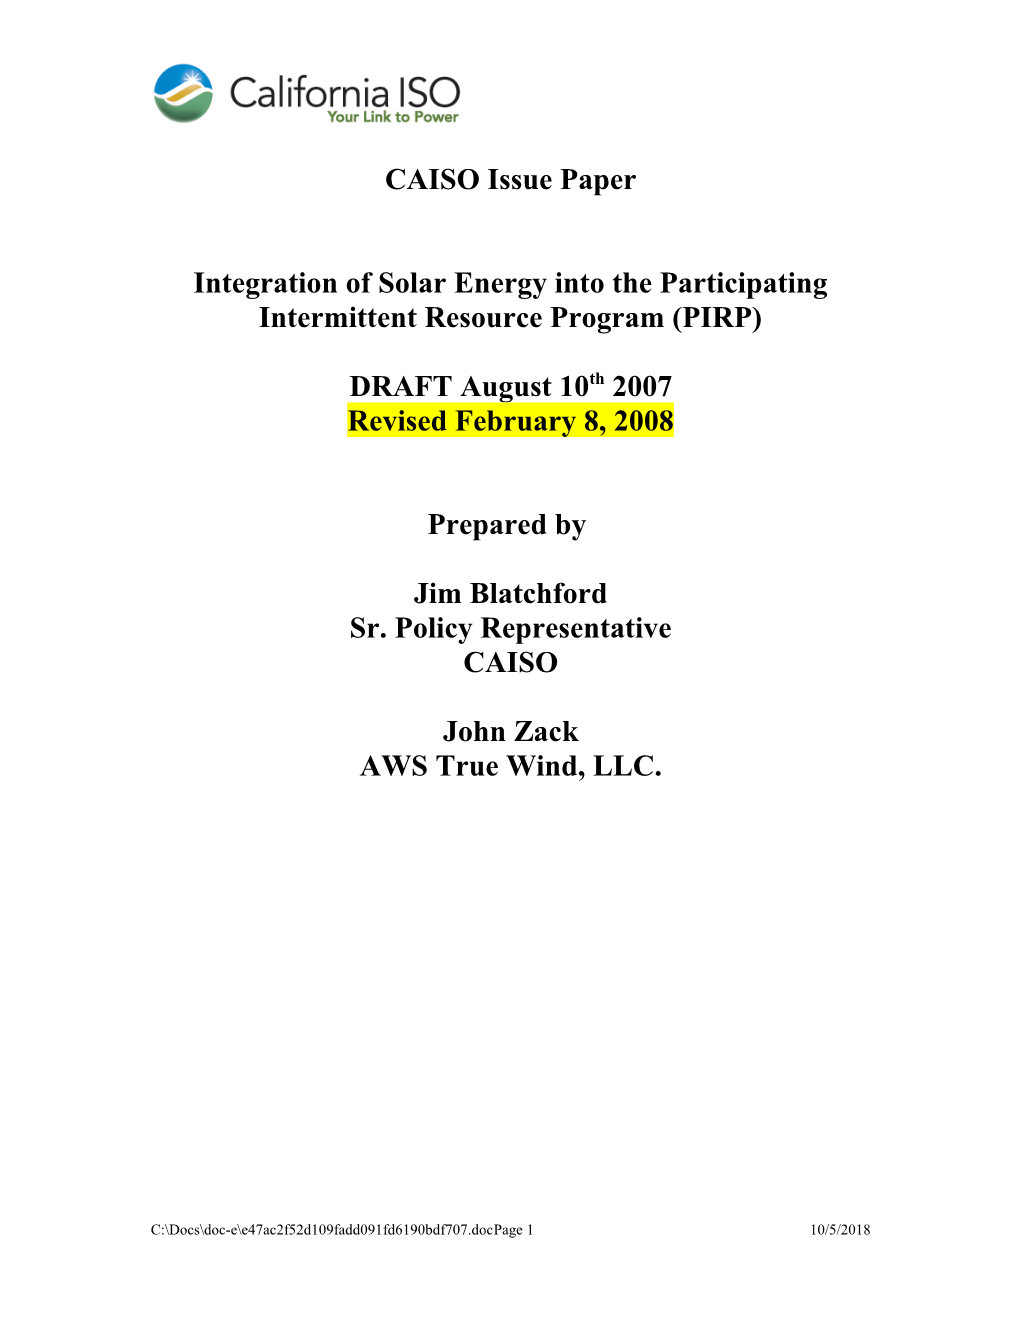 Revised Issue Paper - Integration of Solar Into PIRP